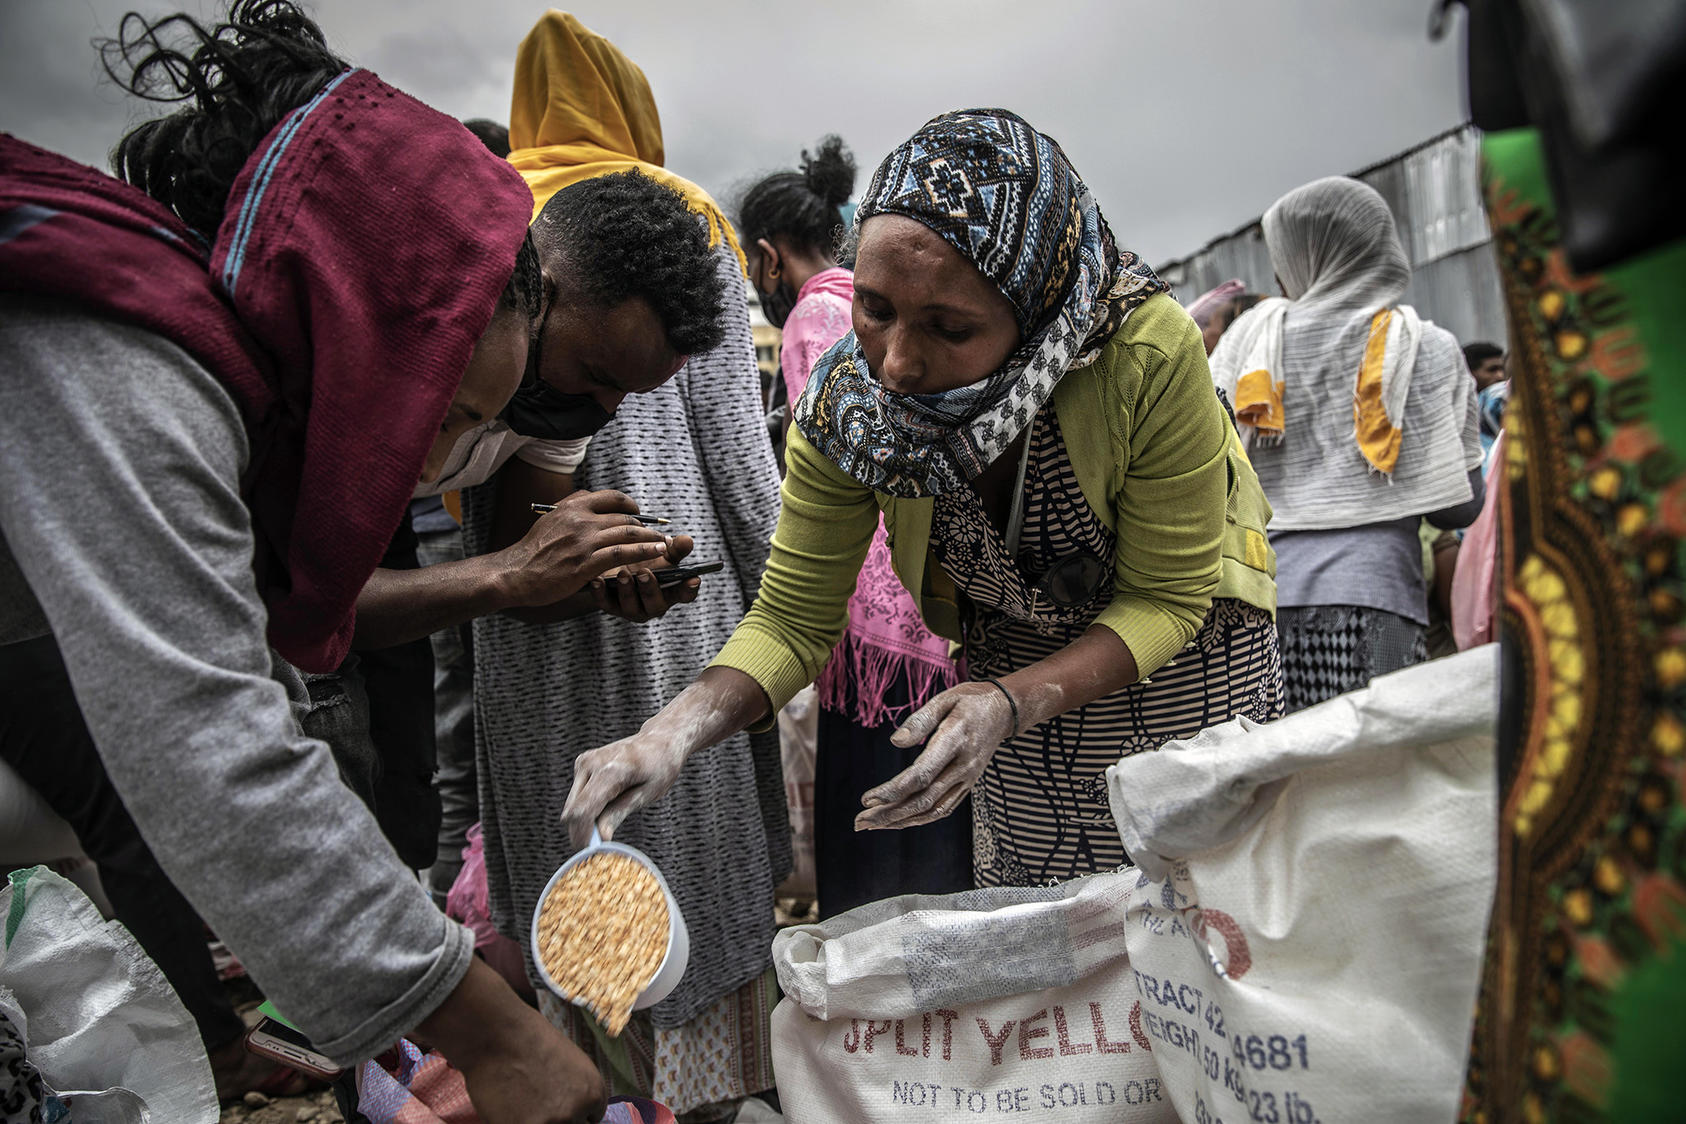 Emergency food distribution in Mekelle, the capital of Ethiopia’s Tigray region, on June 26, 2021. Russia’s war on Ukraine has exacerbated global food security challenges, with African states hit particularly hard. (Finbarr O'Reilly/The New York Times)